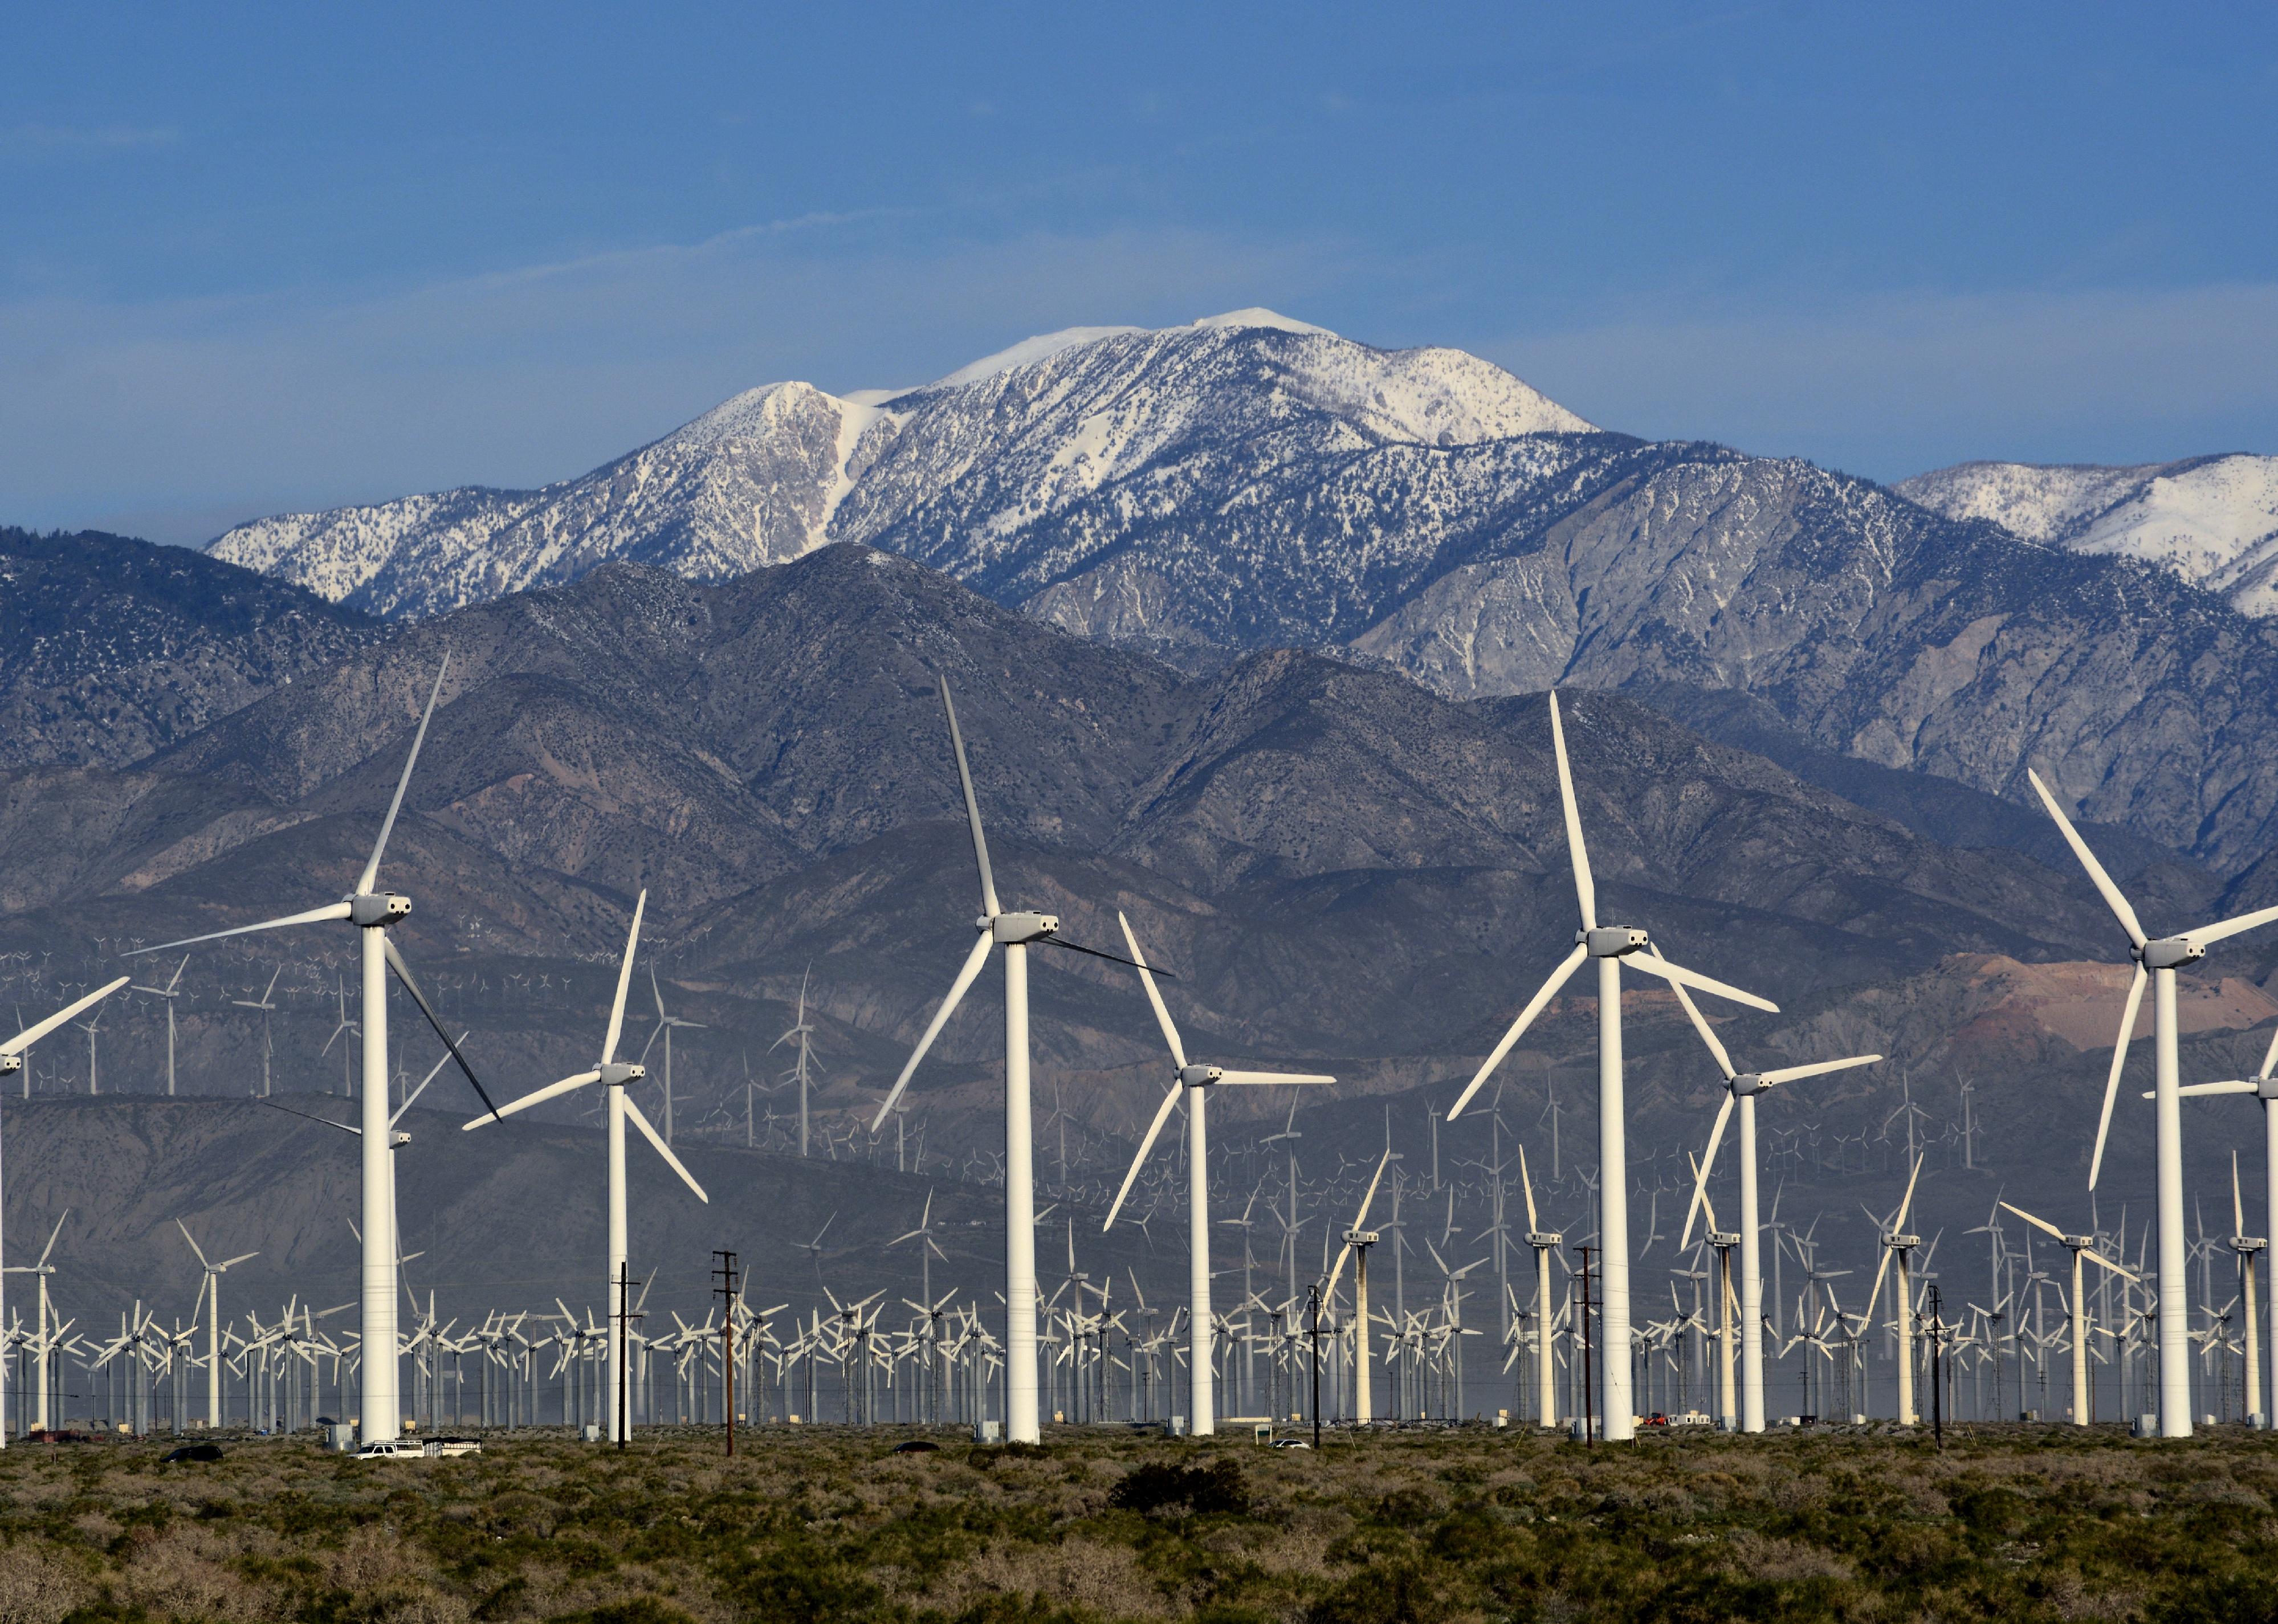 A wind farm in front of snowy mountains in Palm Springs, California.